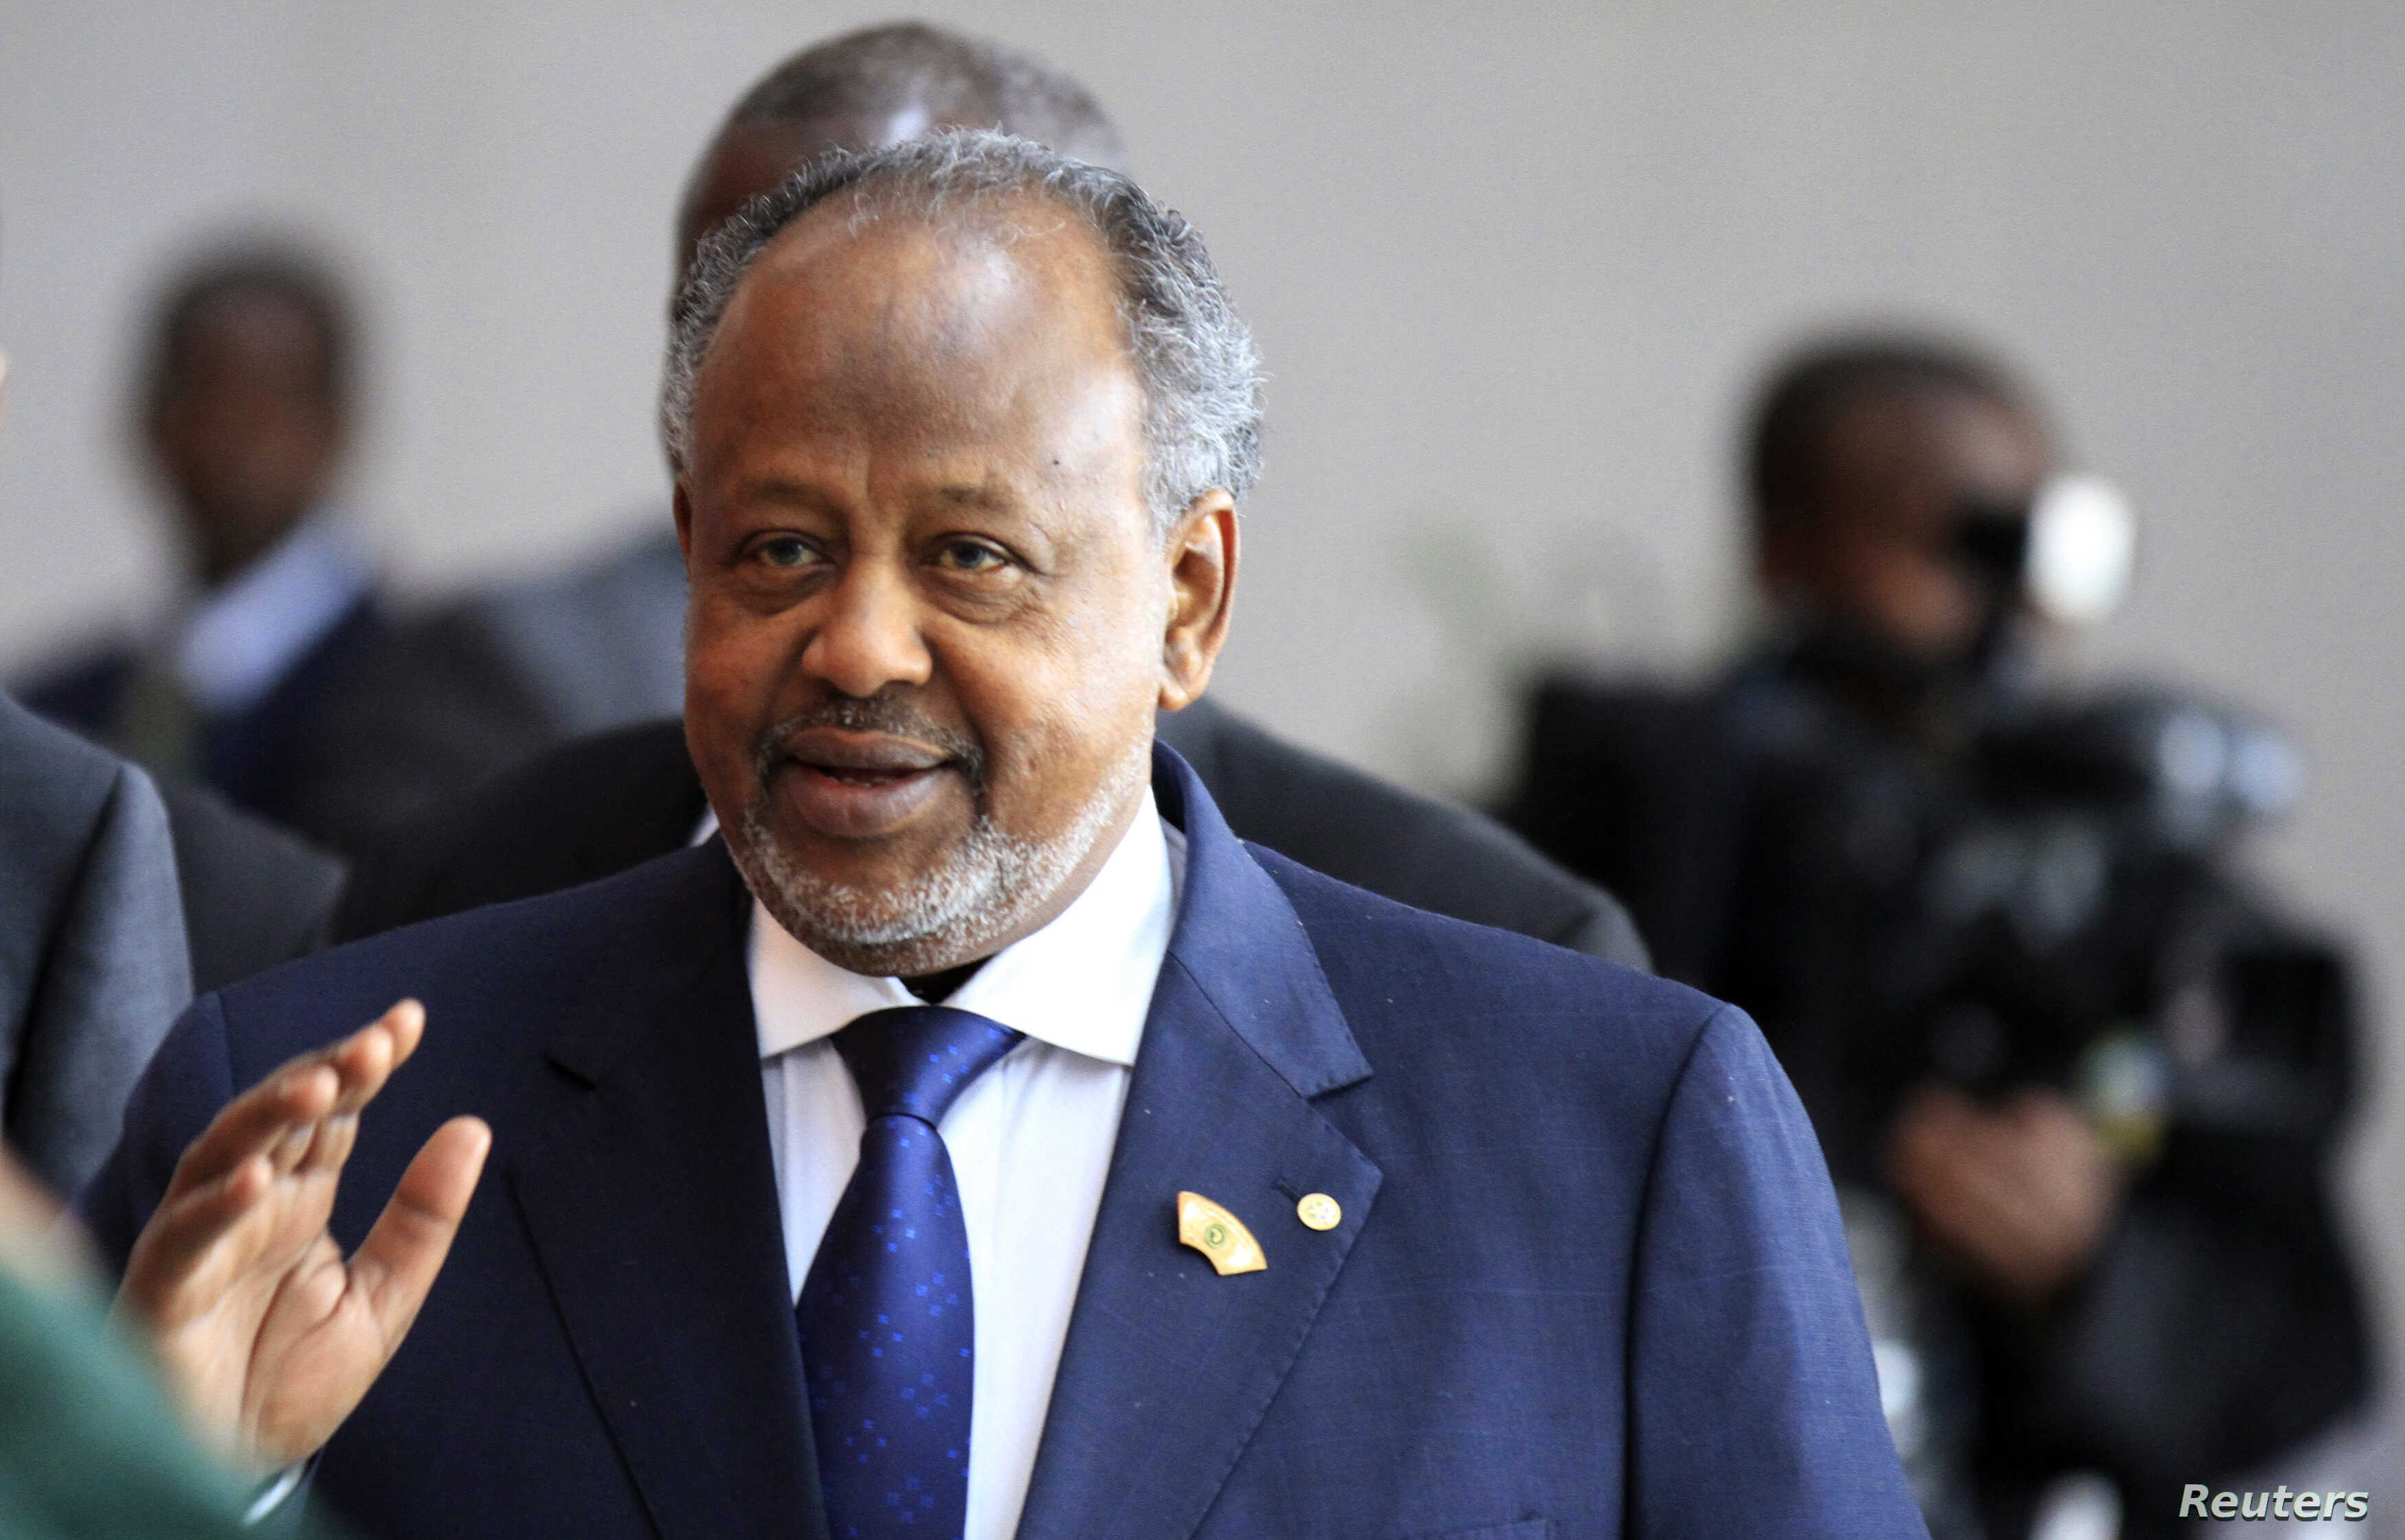 Ismail Omar Guelleh has held power in the Horn of Africa nation for 22 years